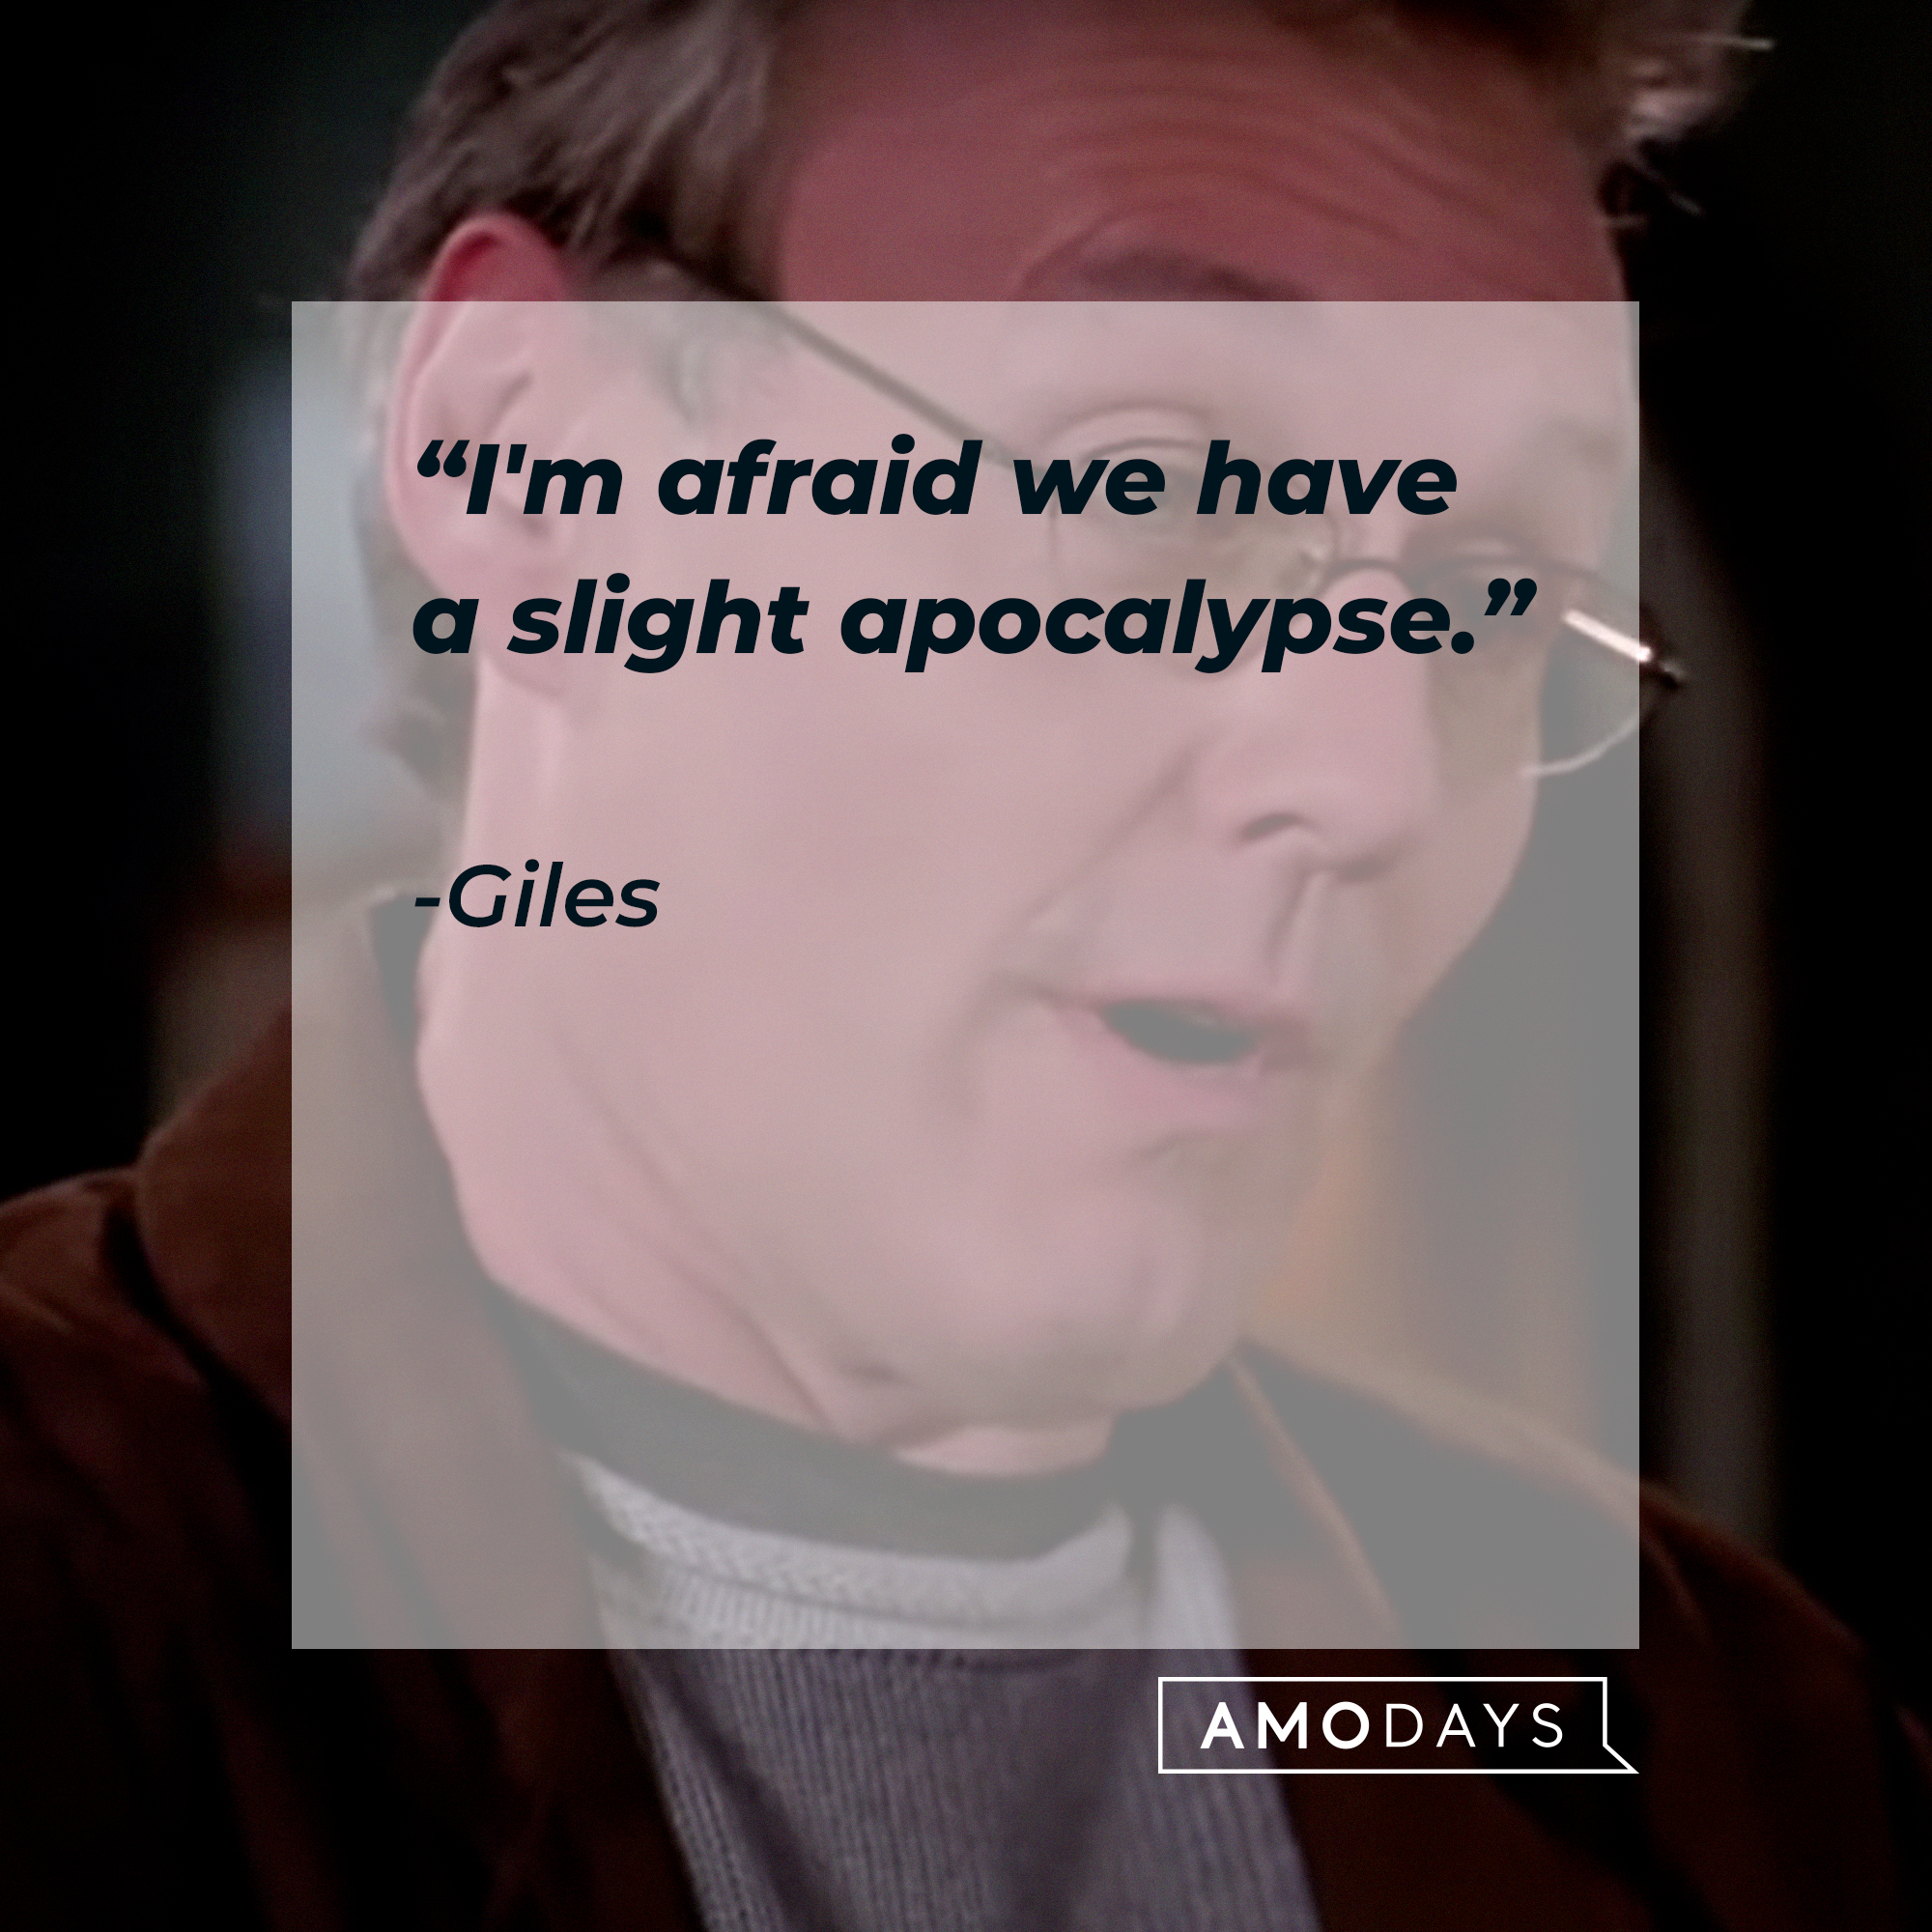 Giles, with his quote: "I'm afraid we have a slight apocalypse." | Source: facebook.com/BuffyTheVampireSlayer